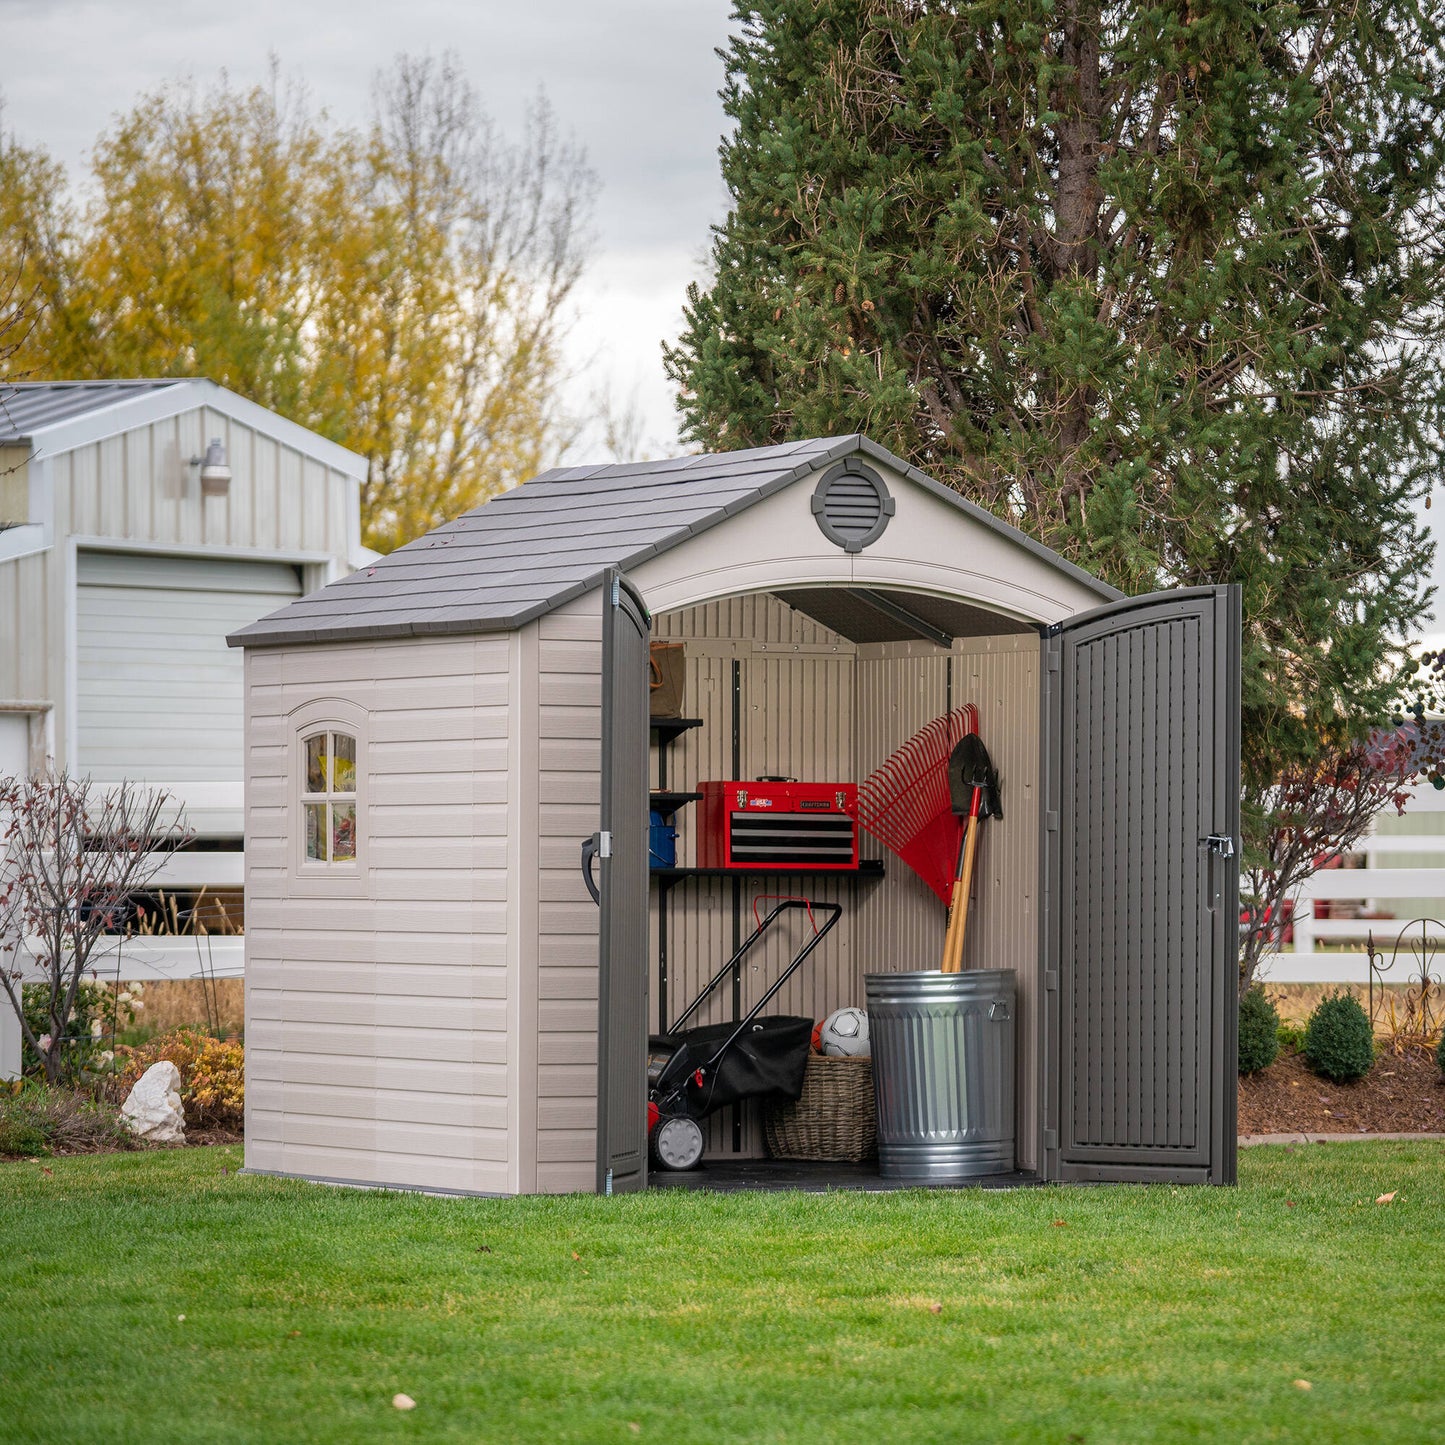 Lifetime 8 Ft. x 7.5 Ft. Outdoor Storage Shed